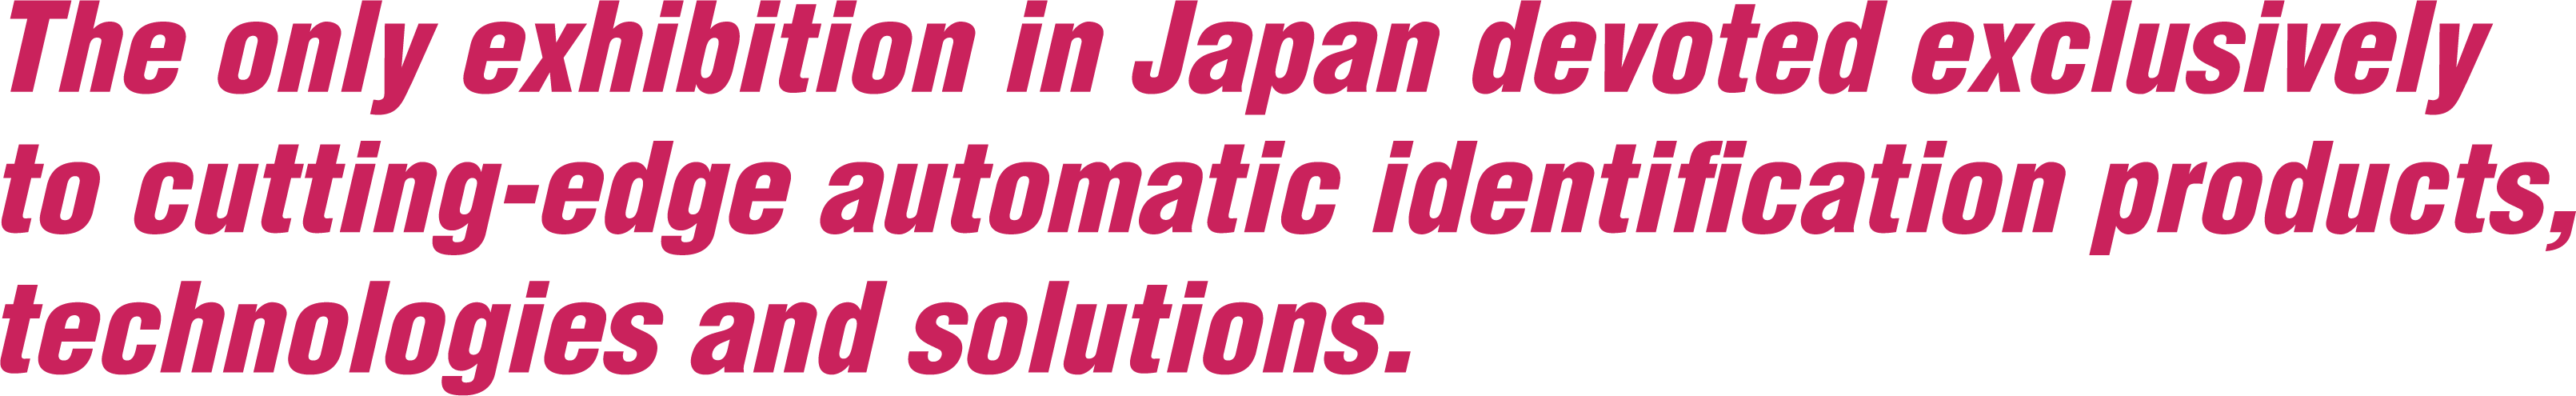 The only exhibition in Japan devoted exclusively to cutting-edge automatic identification products, technologies and solutions.